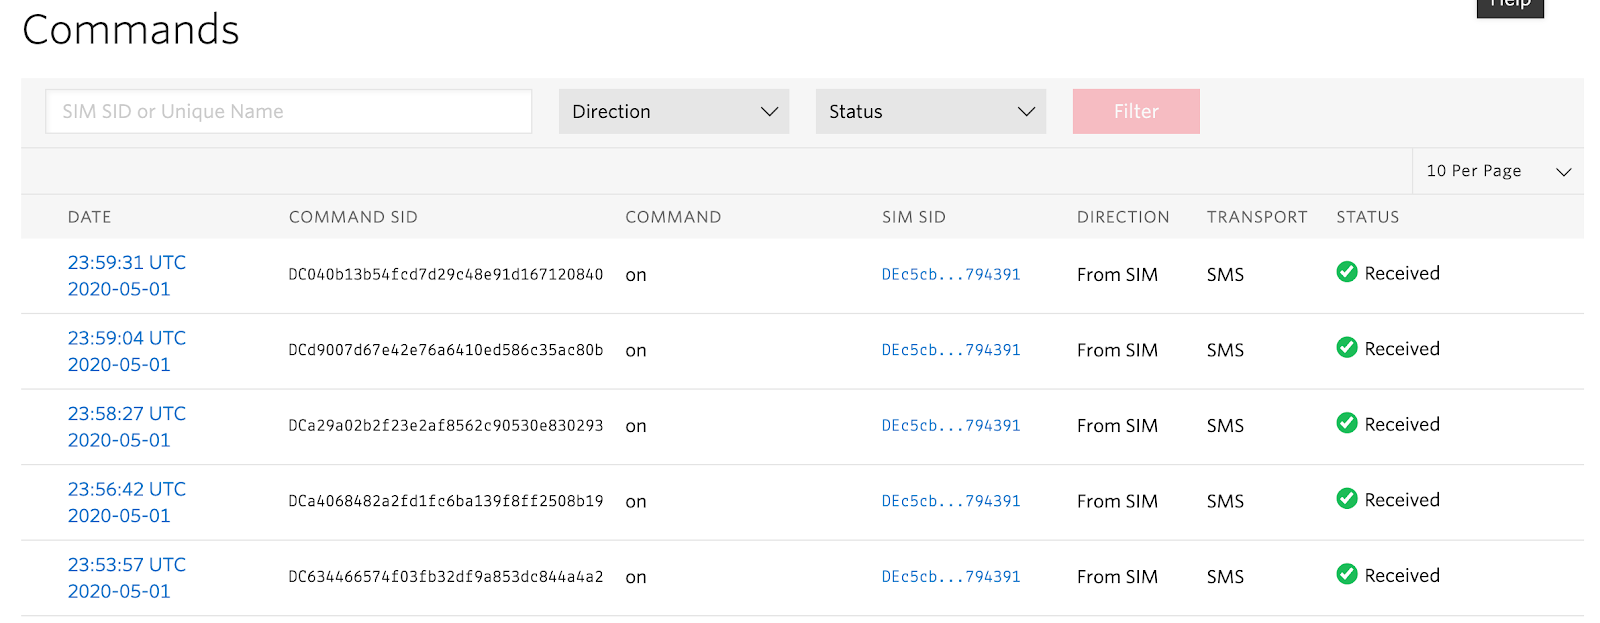 A lot of commands saying "on" being sent to the Twilio console